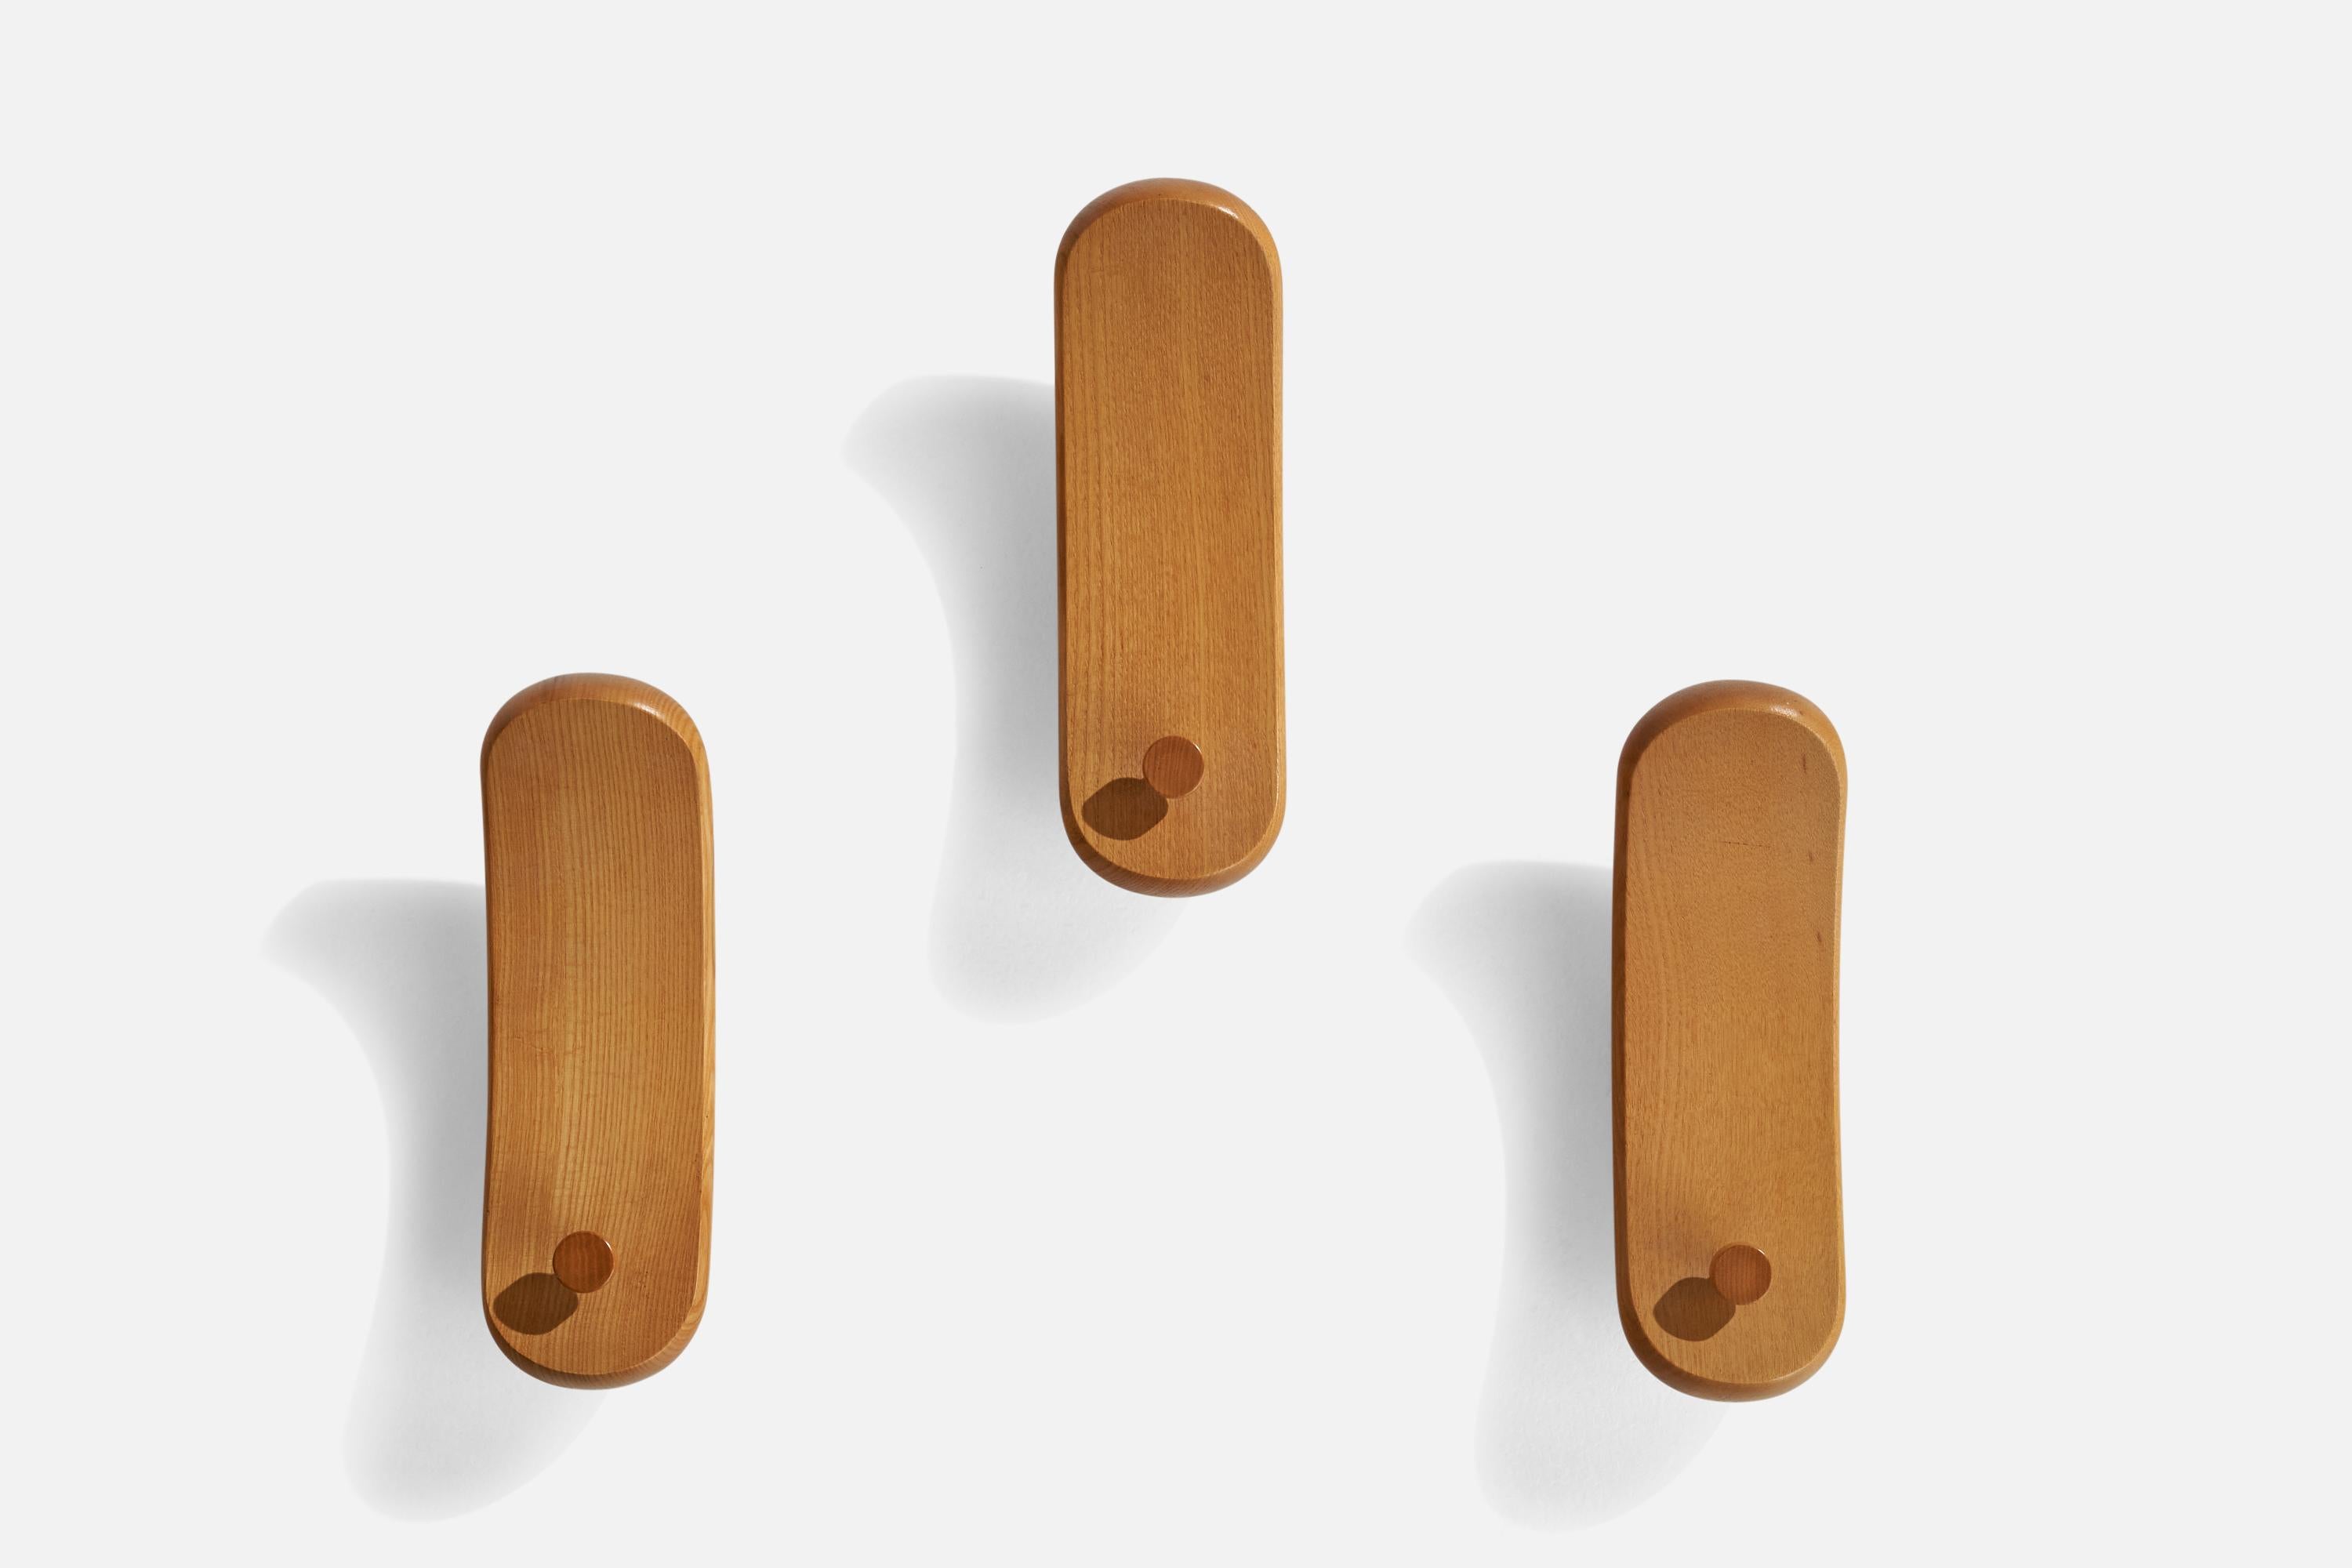 A set of 3 oak coat hangers designed and produced in Italy, 1970s.